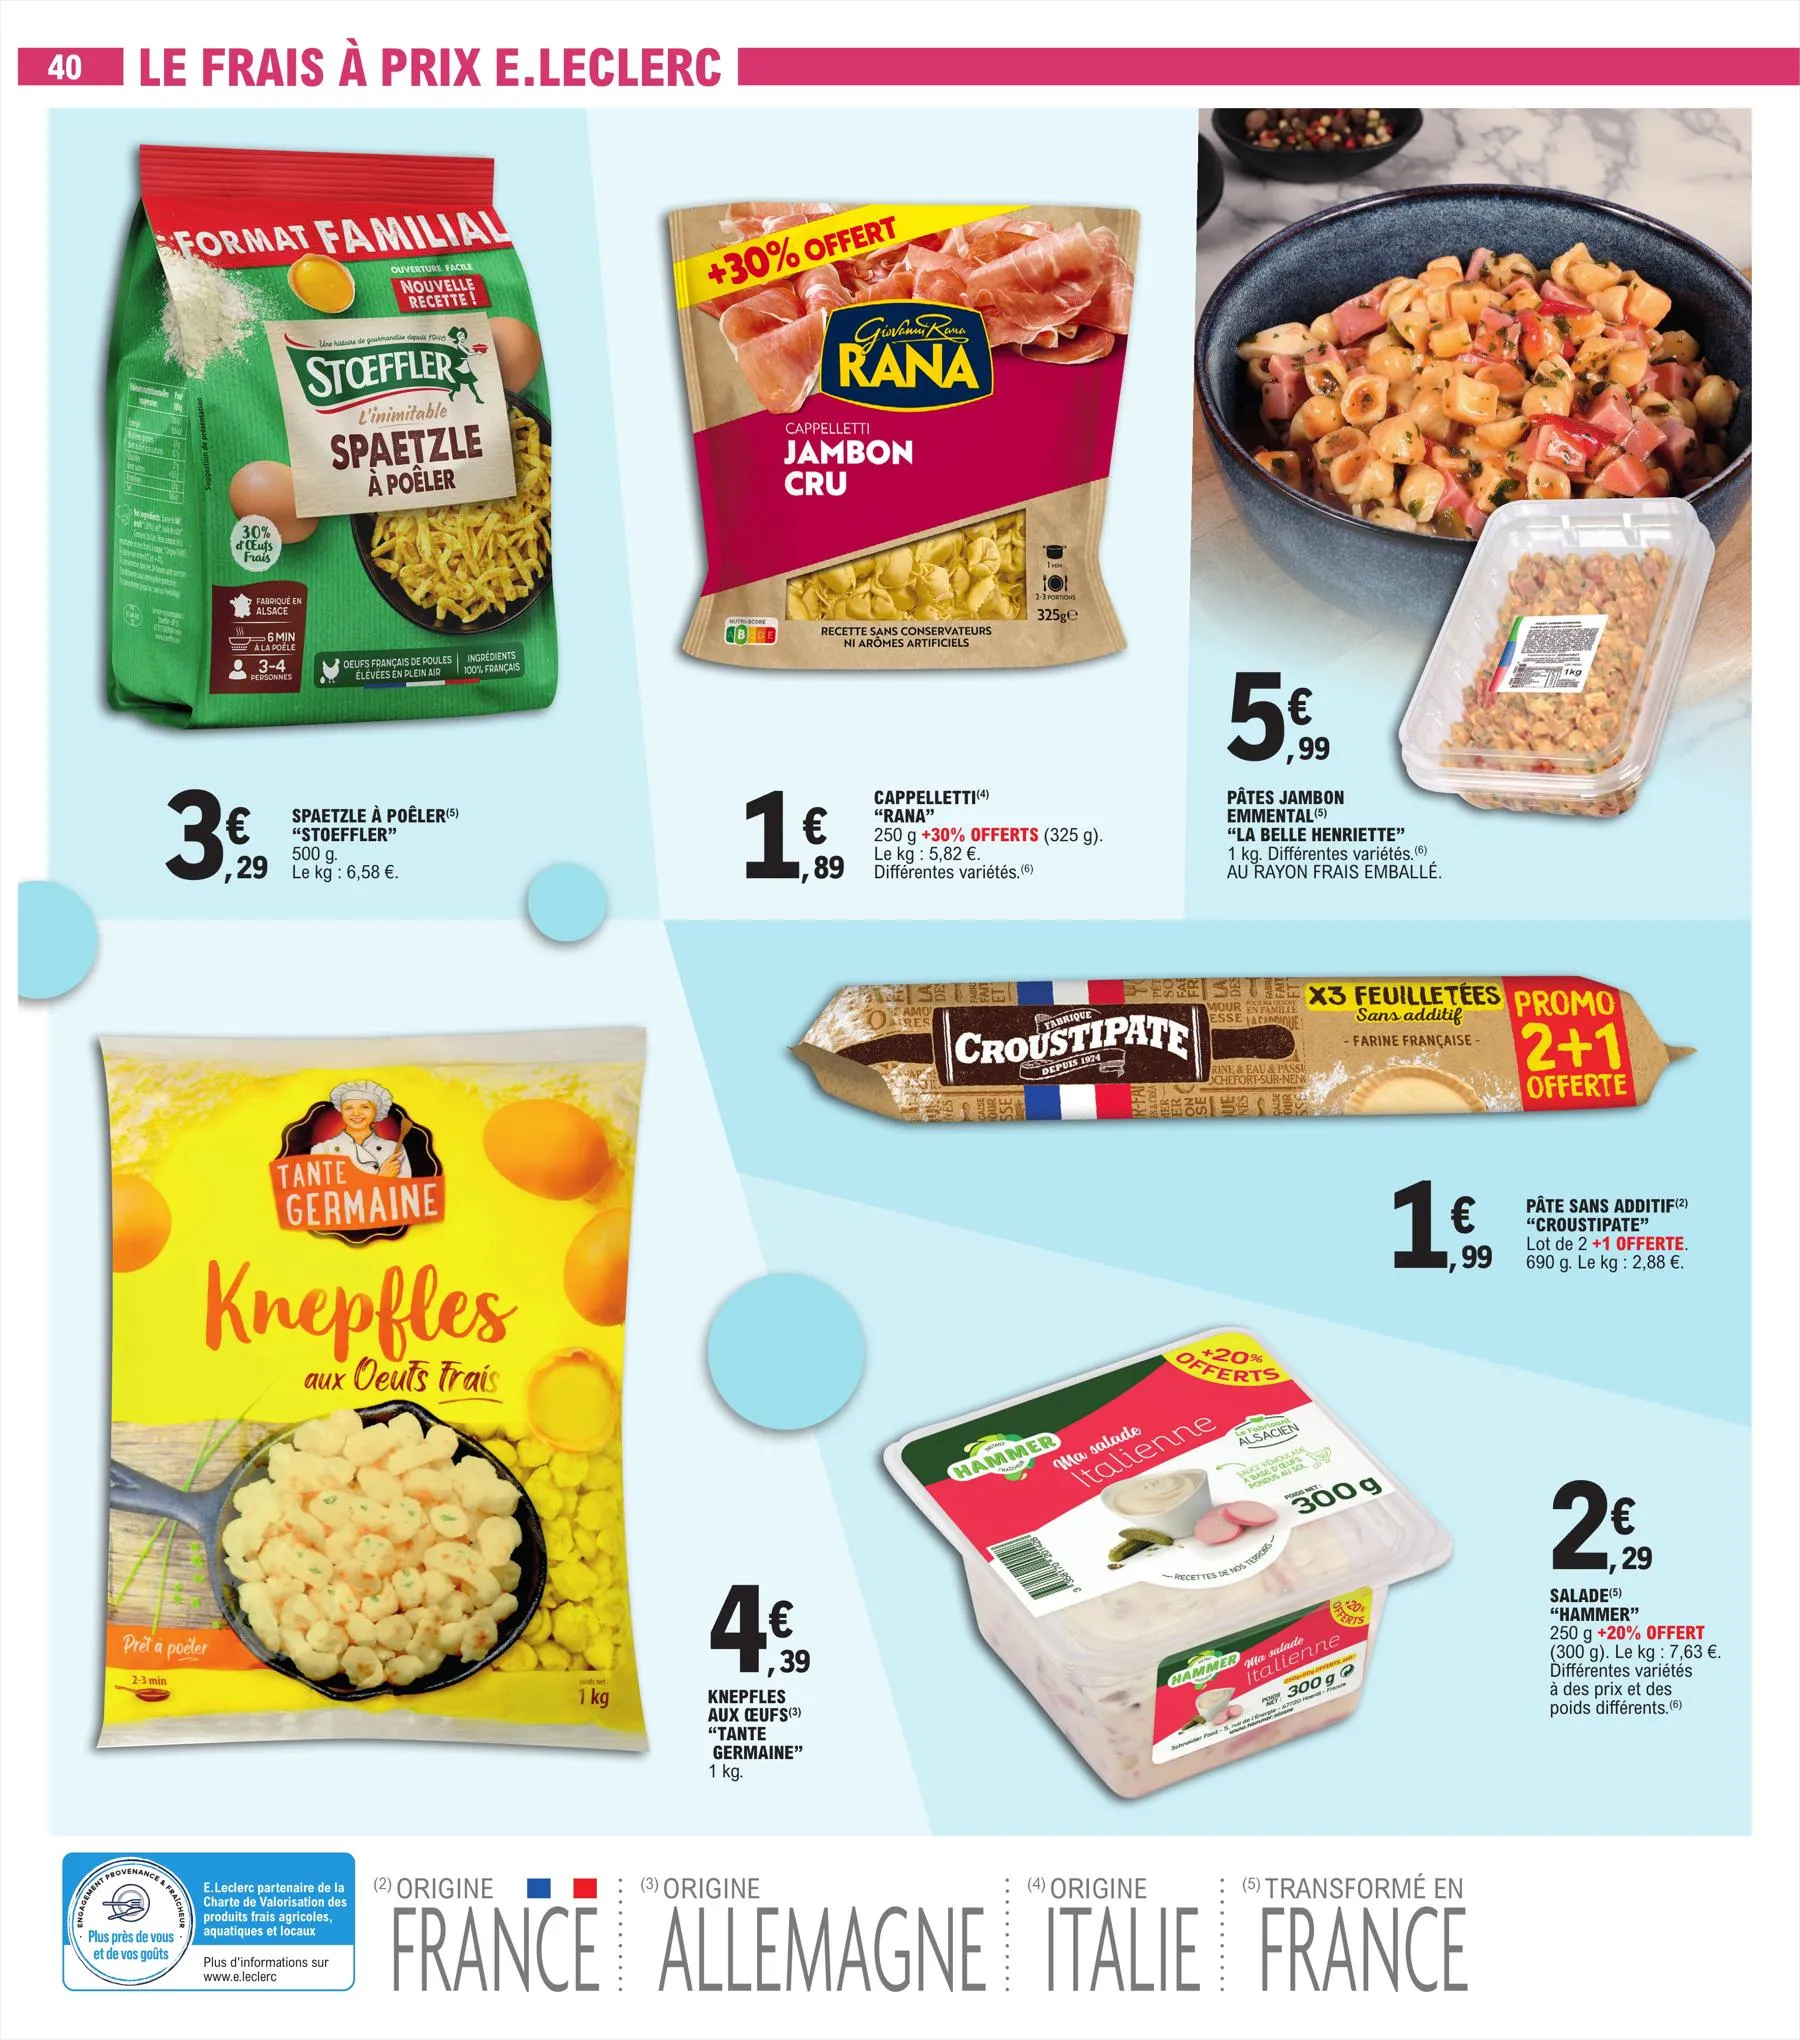 Catalogue Relance Alimentaire 11 - Mixte, page 00040